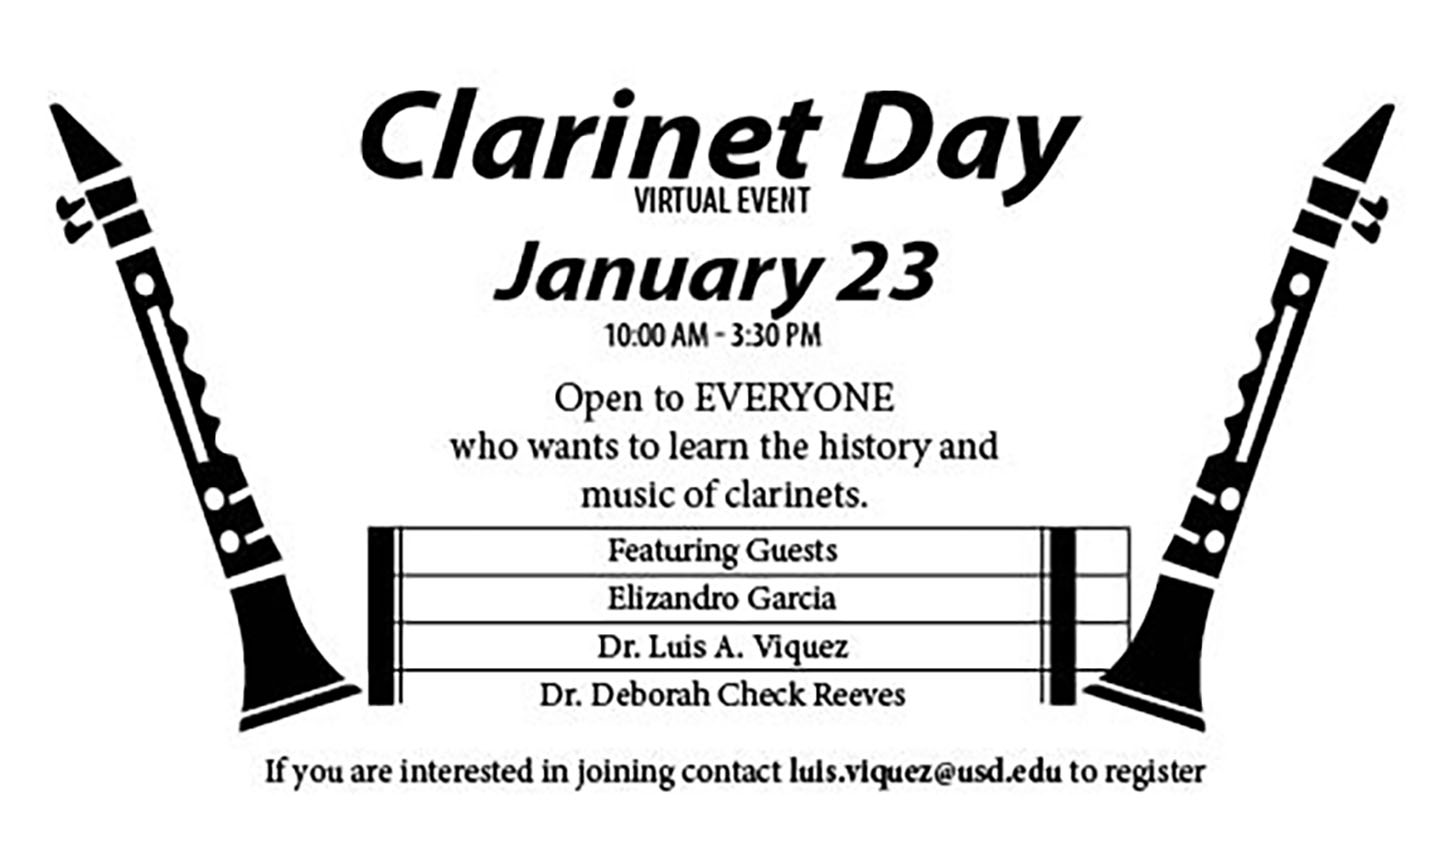 Clarinet Day will explore history, significance of clarinets